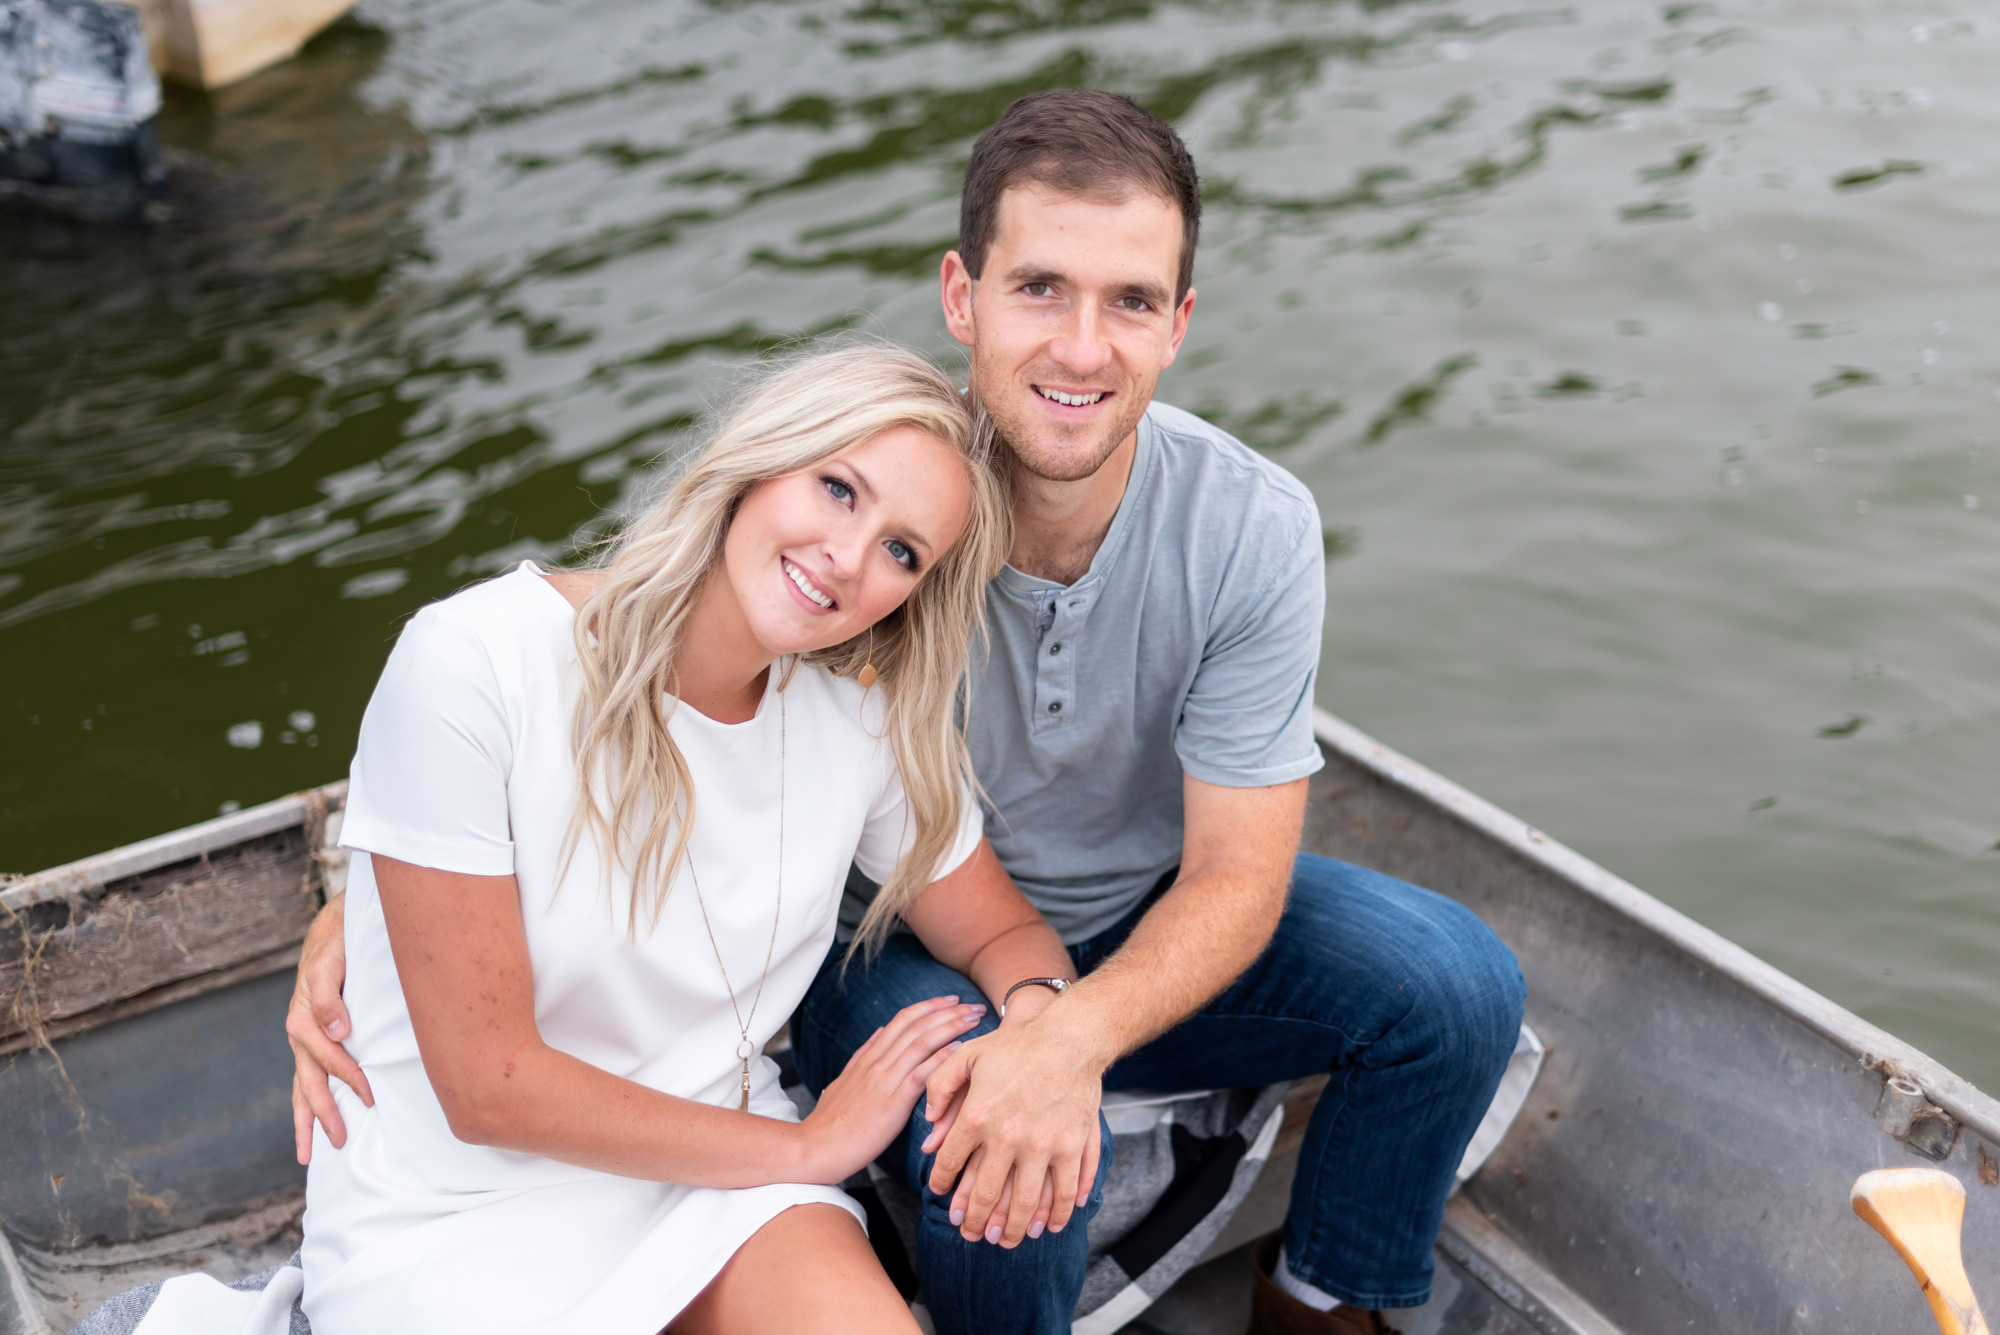 Engagement pictures in a canoe photographed by Layne Pfliiger - lake engagement - canoe engagement - lake photoshoot - lake engagement shoot - canoe